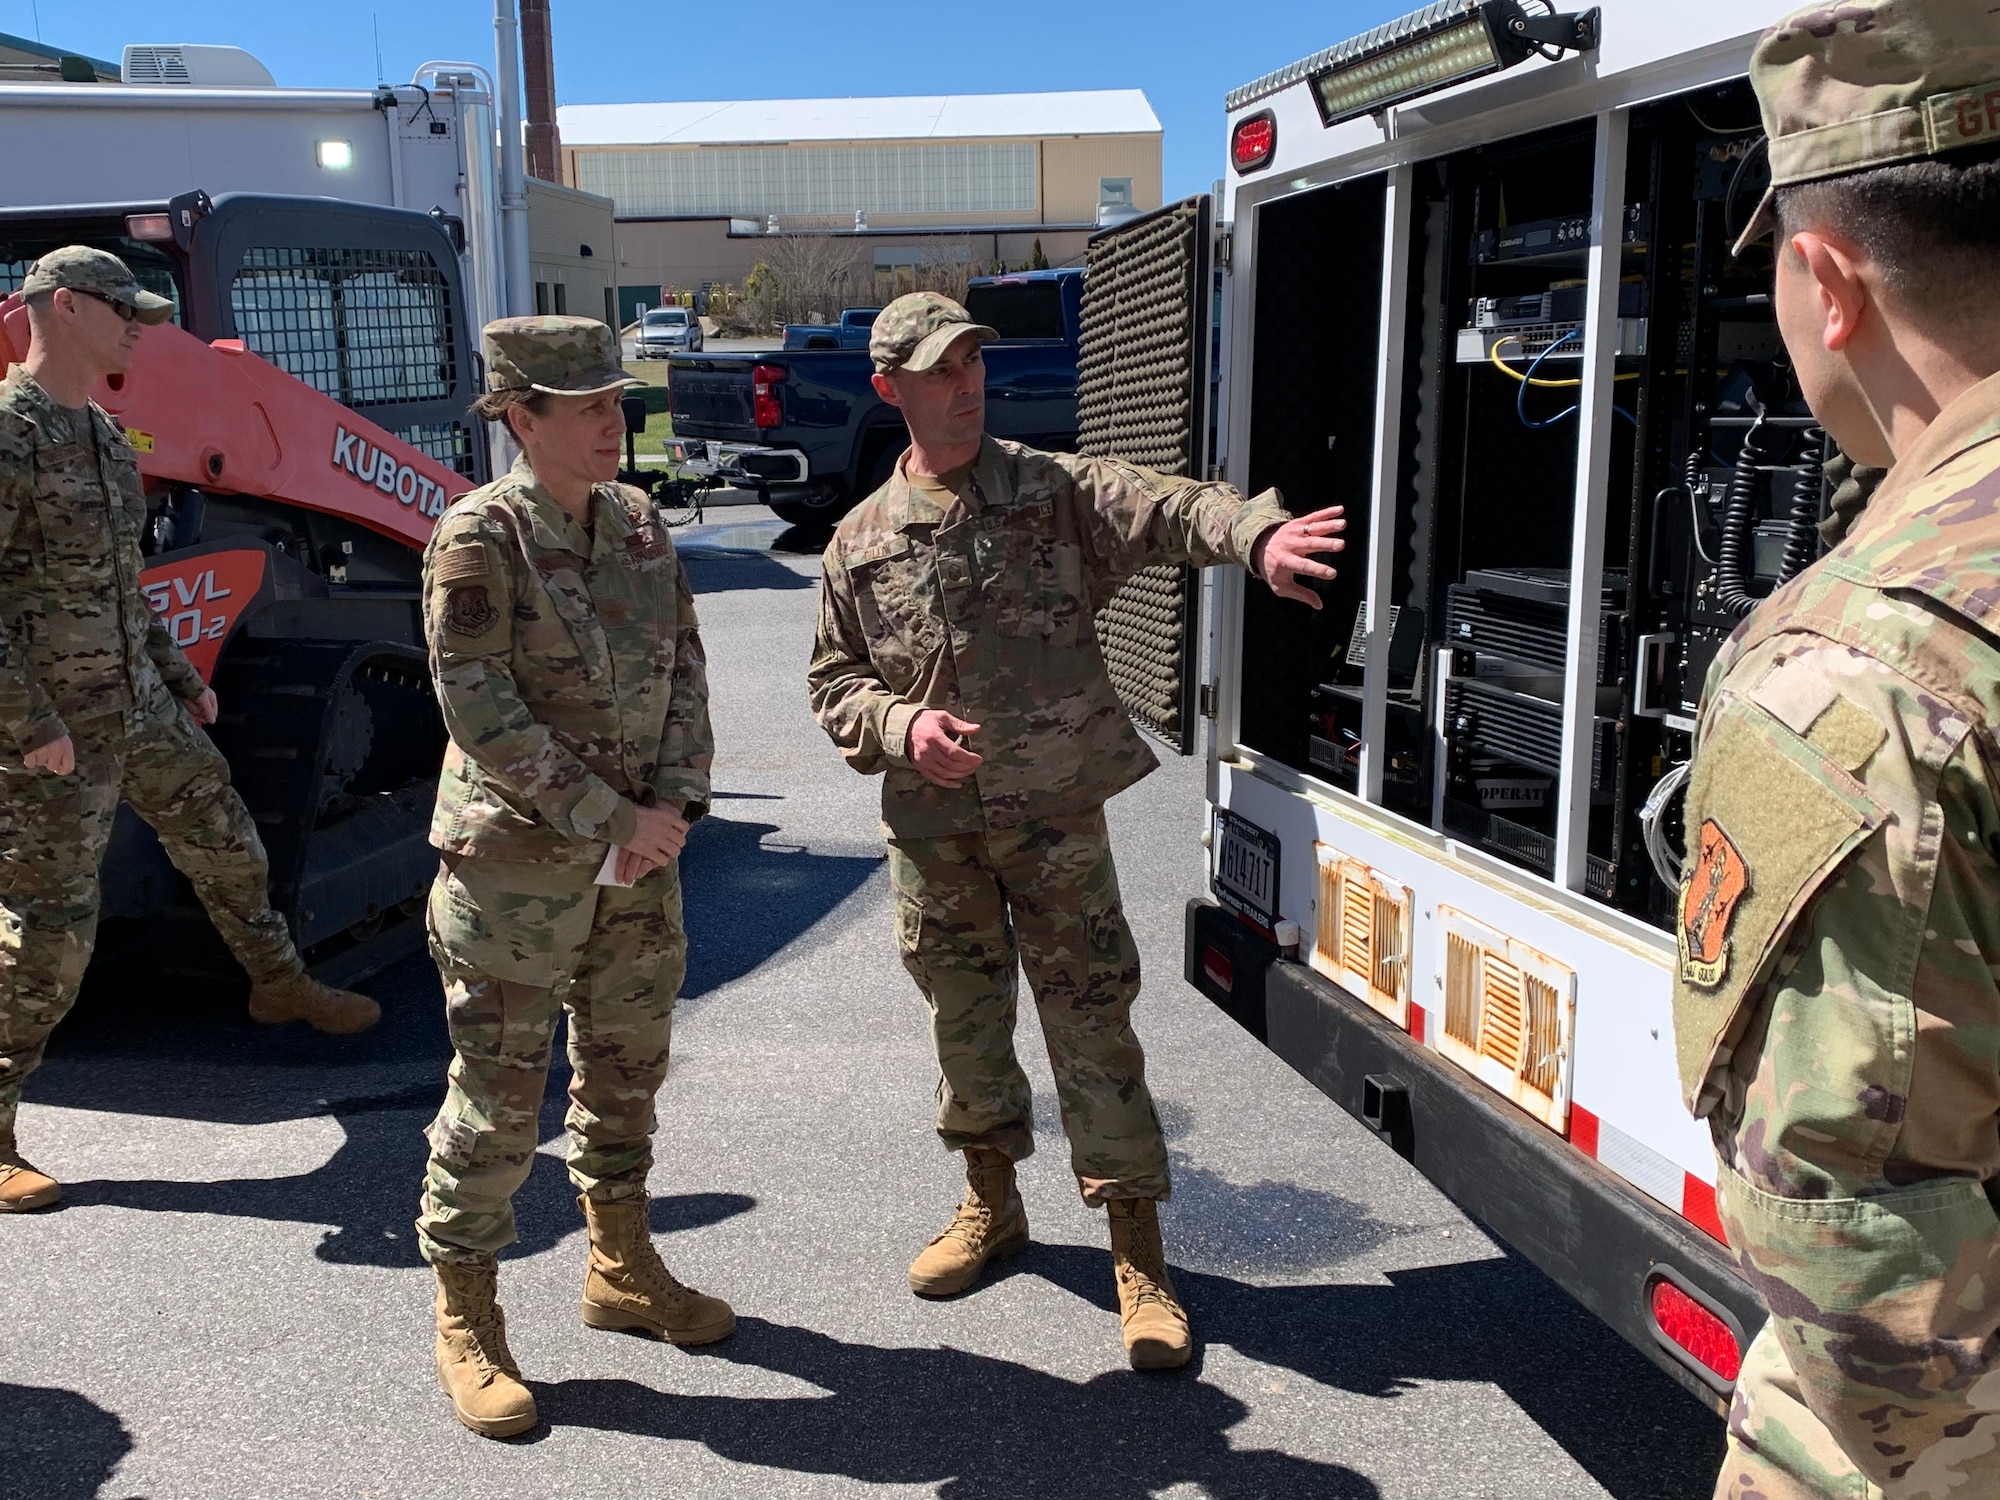 Master Sgt. Brian Dillon, 106th Communication Flight client systems technician supervisor, explains the importance of the Mobile Emergency Response Center to Brig. Gen. Denise Donnell, the commander of the New York Air National Guard at Francis S. Gabreski ANGB, Westhampton Beach, N.Y., April 8, 2022. The Mobile Emergency Response Center is used when officials and responders need to establish reliable communication or extend their range of communication. (U.S. Air National Guard photo by Lt. Cheran A. Campbell)